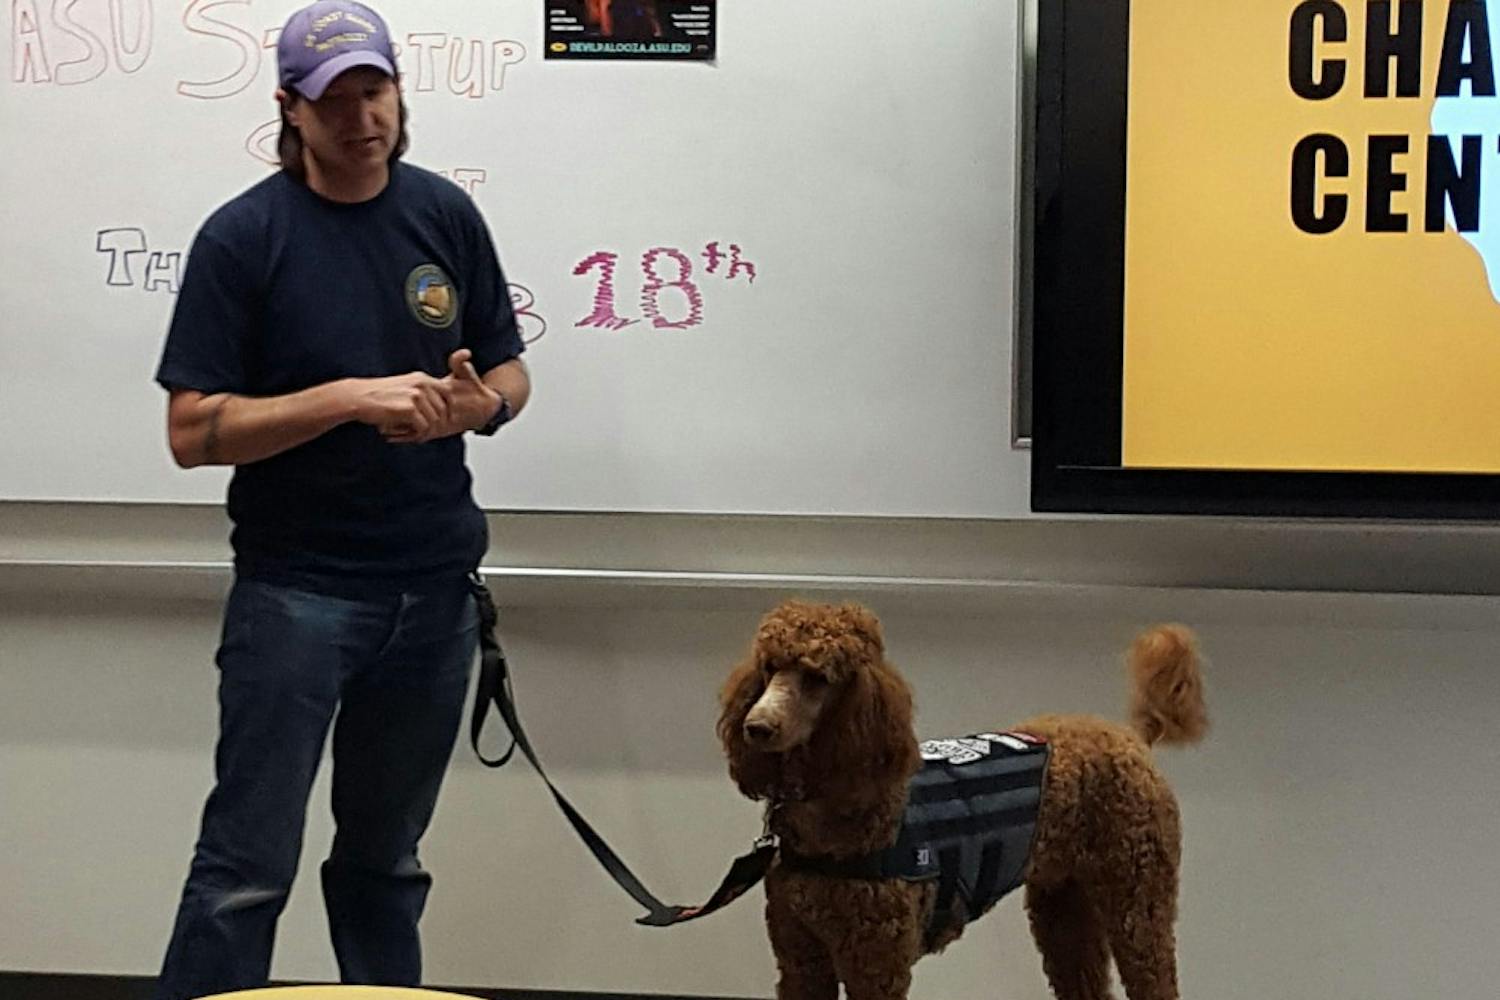 Scott Sefranka, a community advisor, and his service dog, Bigby Wolf, talk about service dogs at the Salute to Service event hosted by Engaging Minds on Feb. 18, 2017 on ASU's West campus.